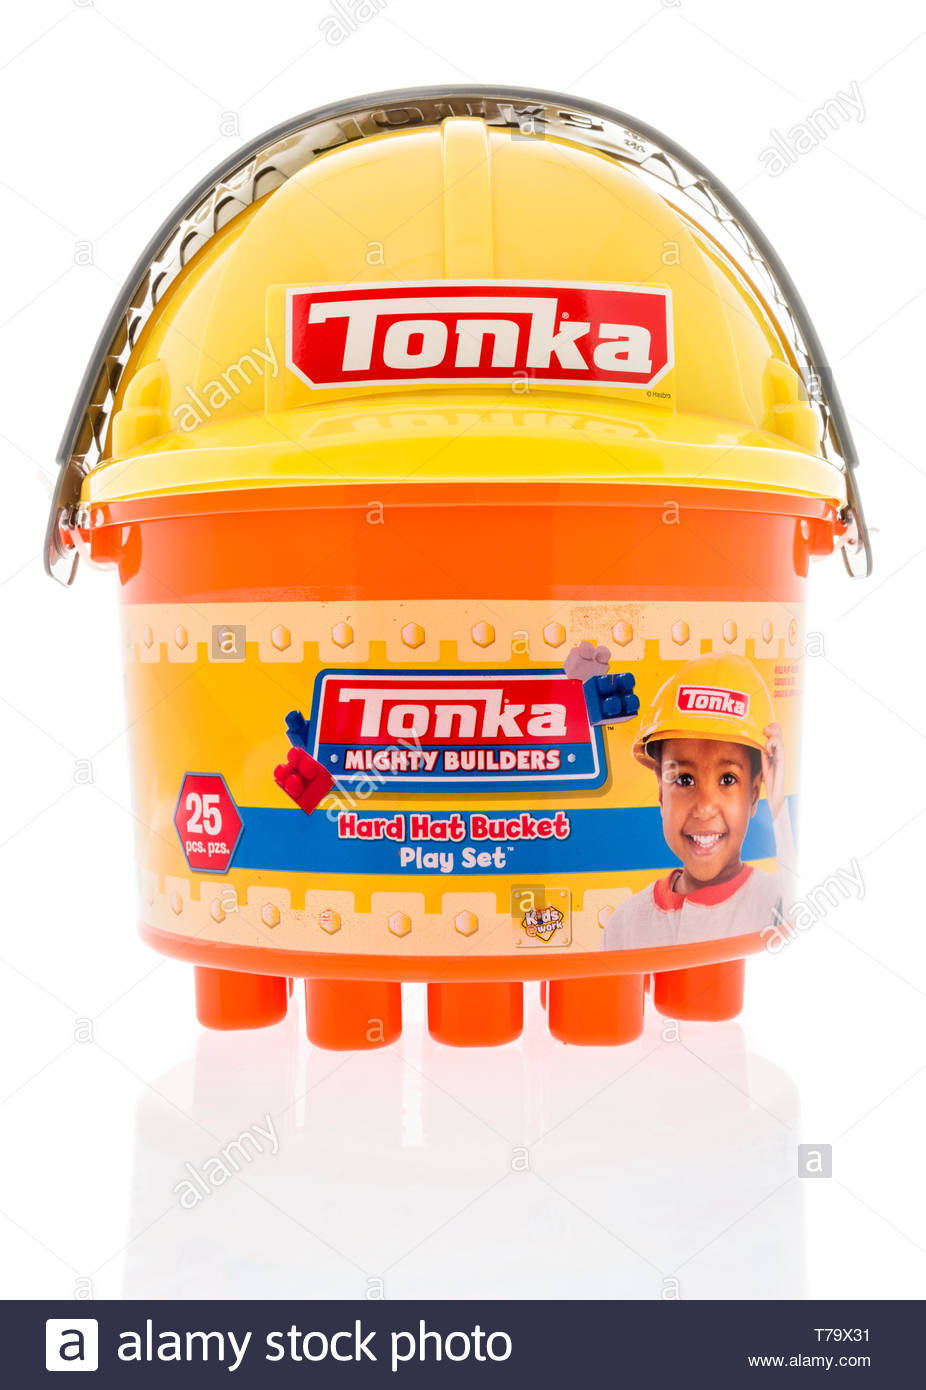 Winneconne Wi May A Package Of Tonka Mighty Builders